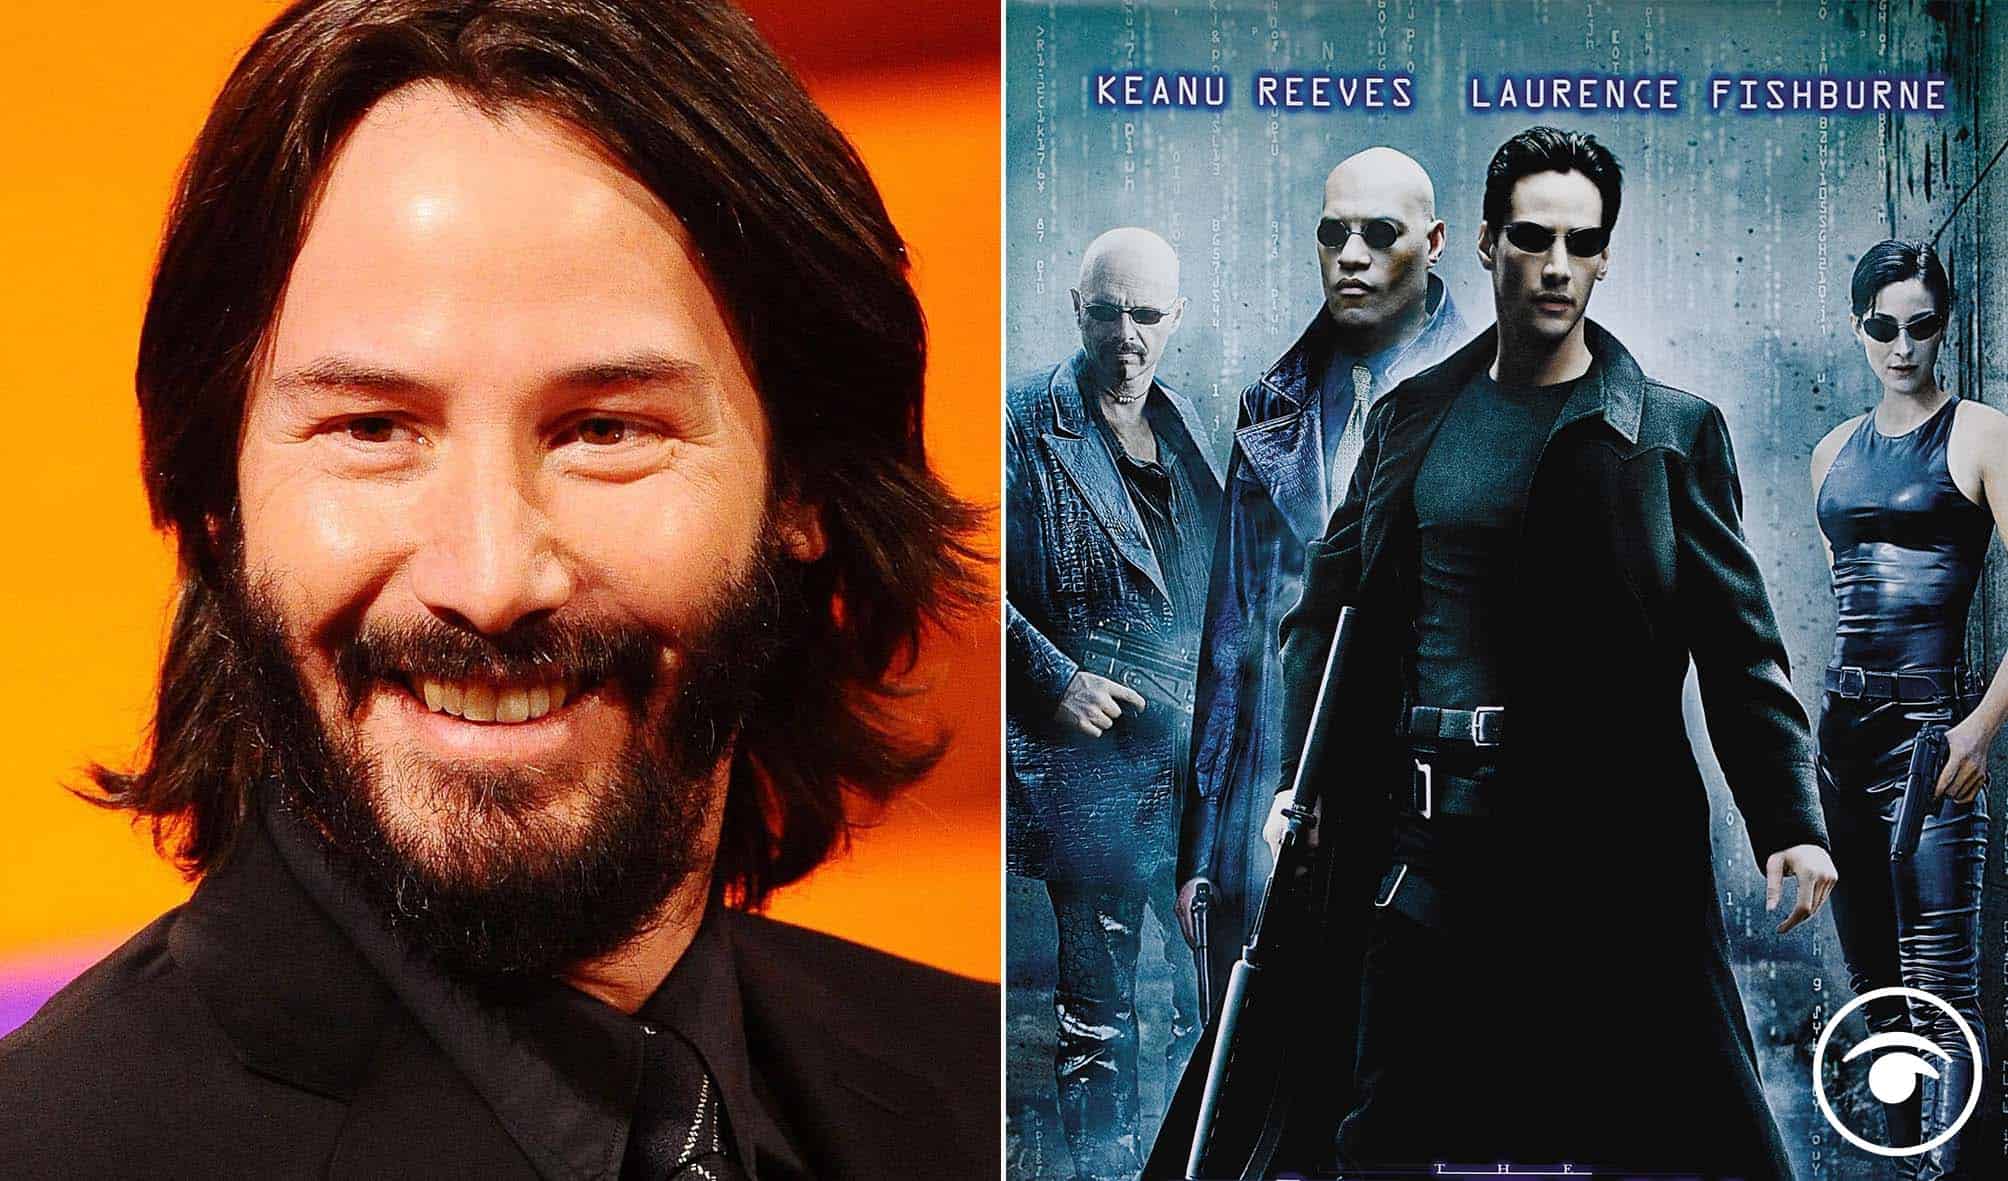 Keanu Reeves donated an eye-watering sum from Matrix salary to charity